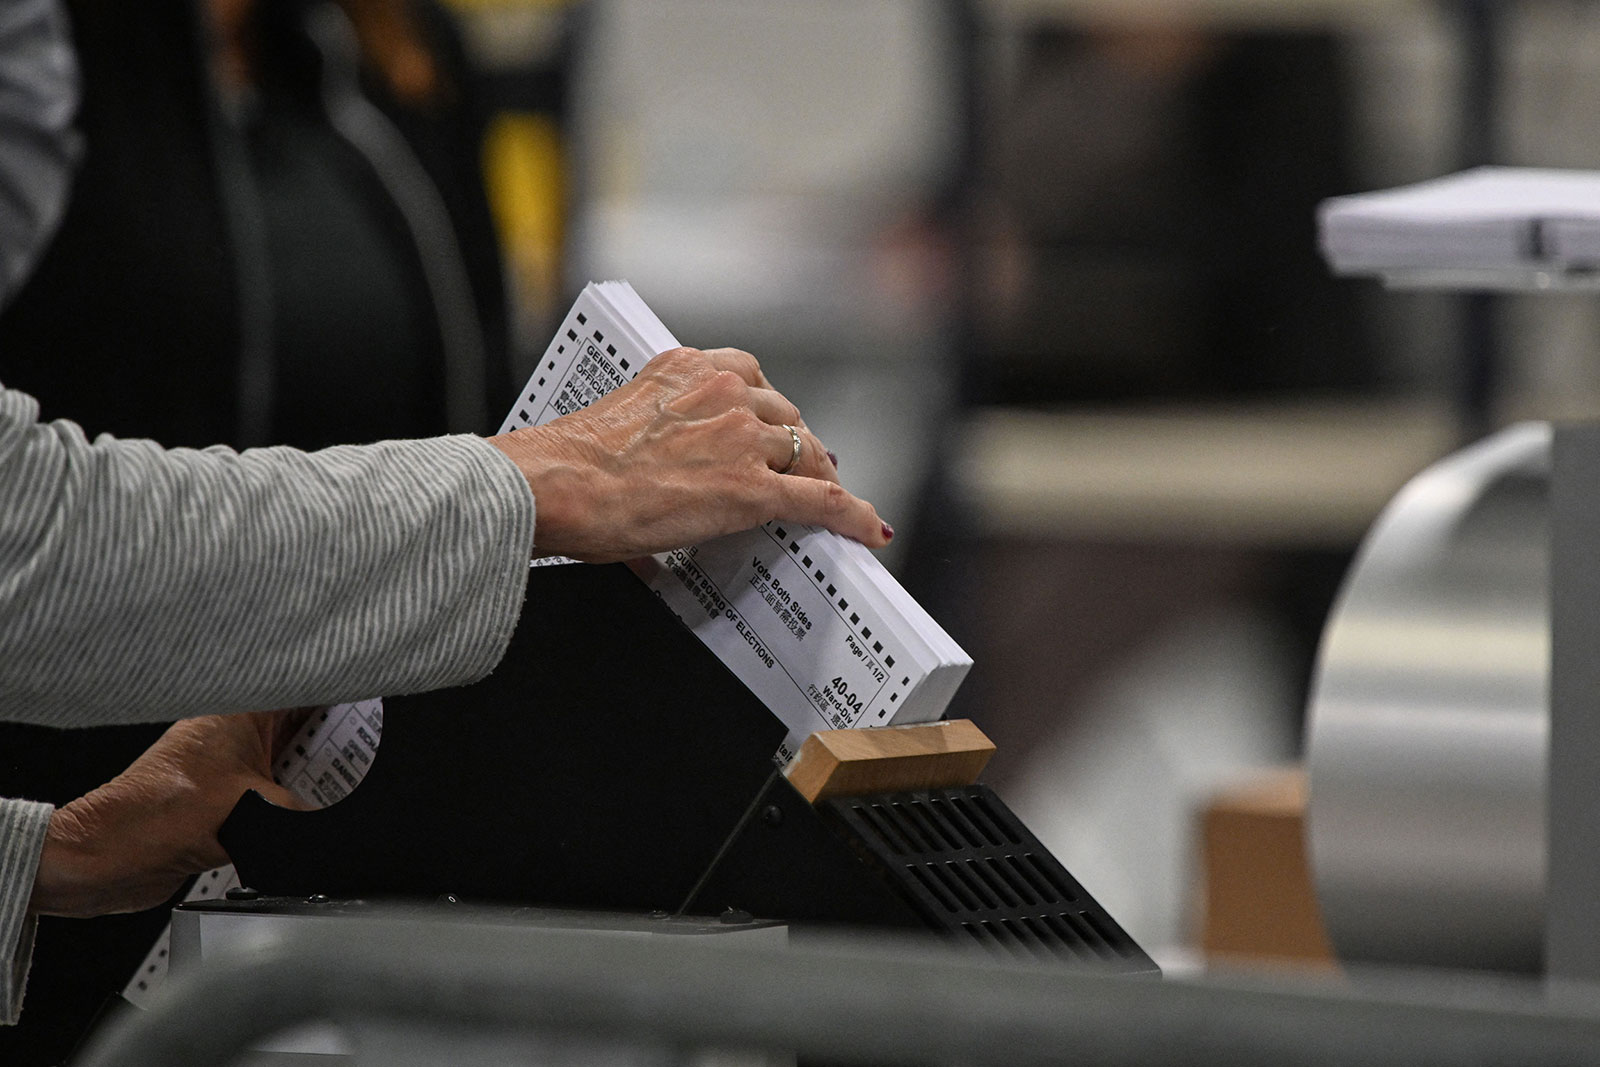 Poll workers process ballots at an elections warehouse outside of Philadelphia on November 8.